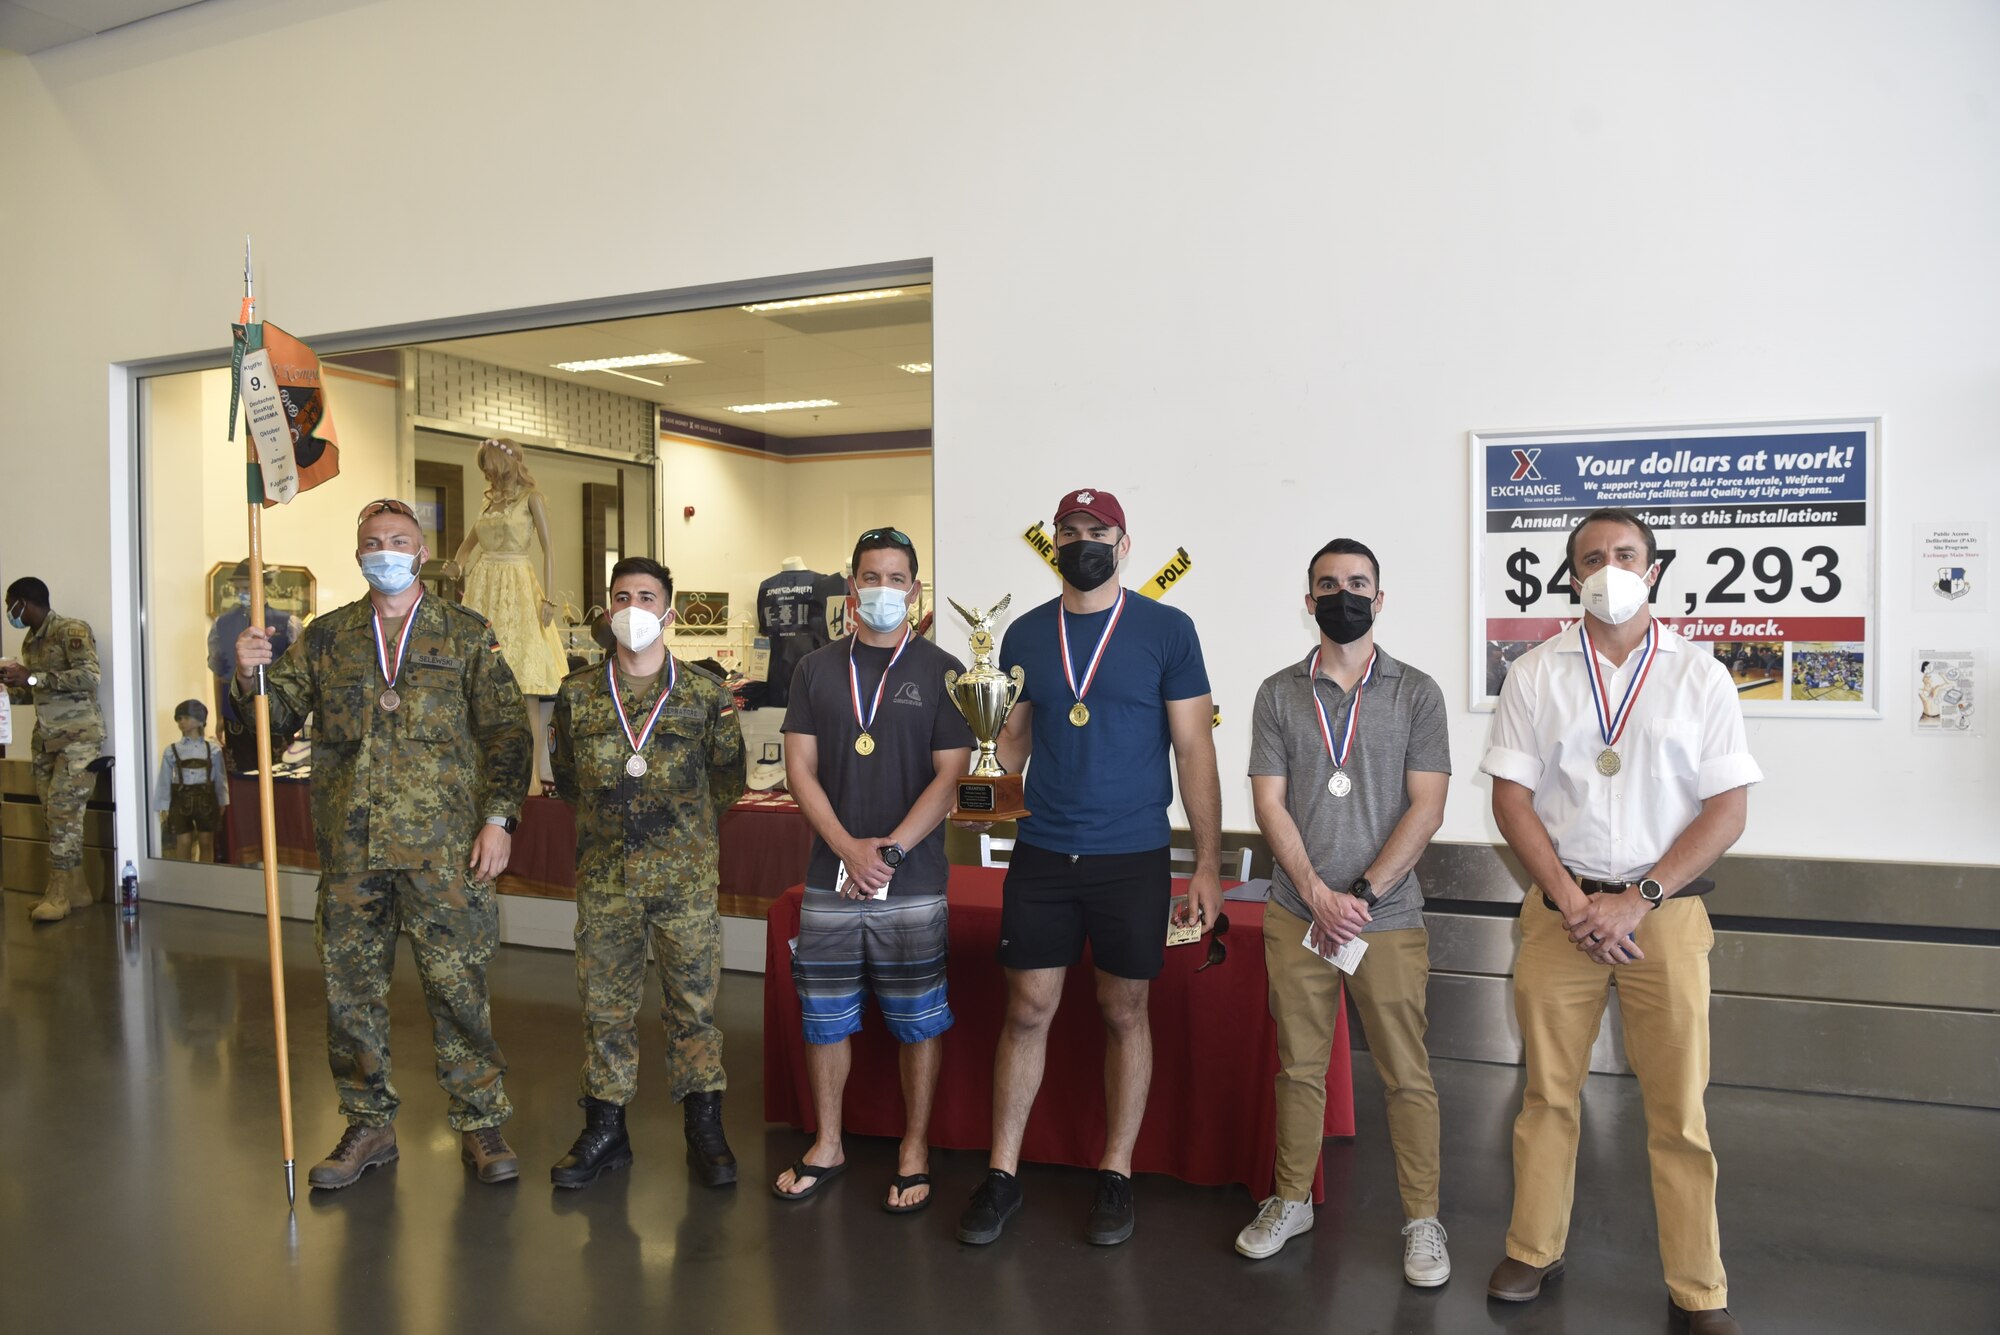 The winners of this year’s Defender Challenge pose for a photo at Spangdahlem Air Base, Germany, June 2, 2021.